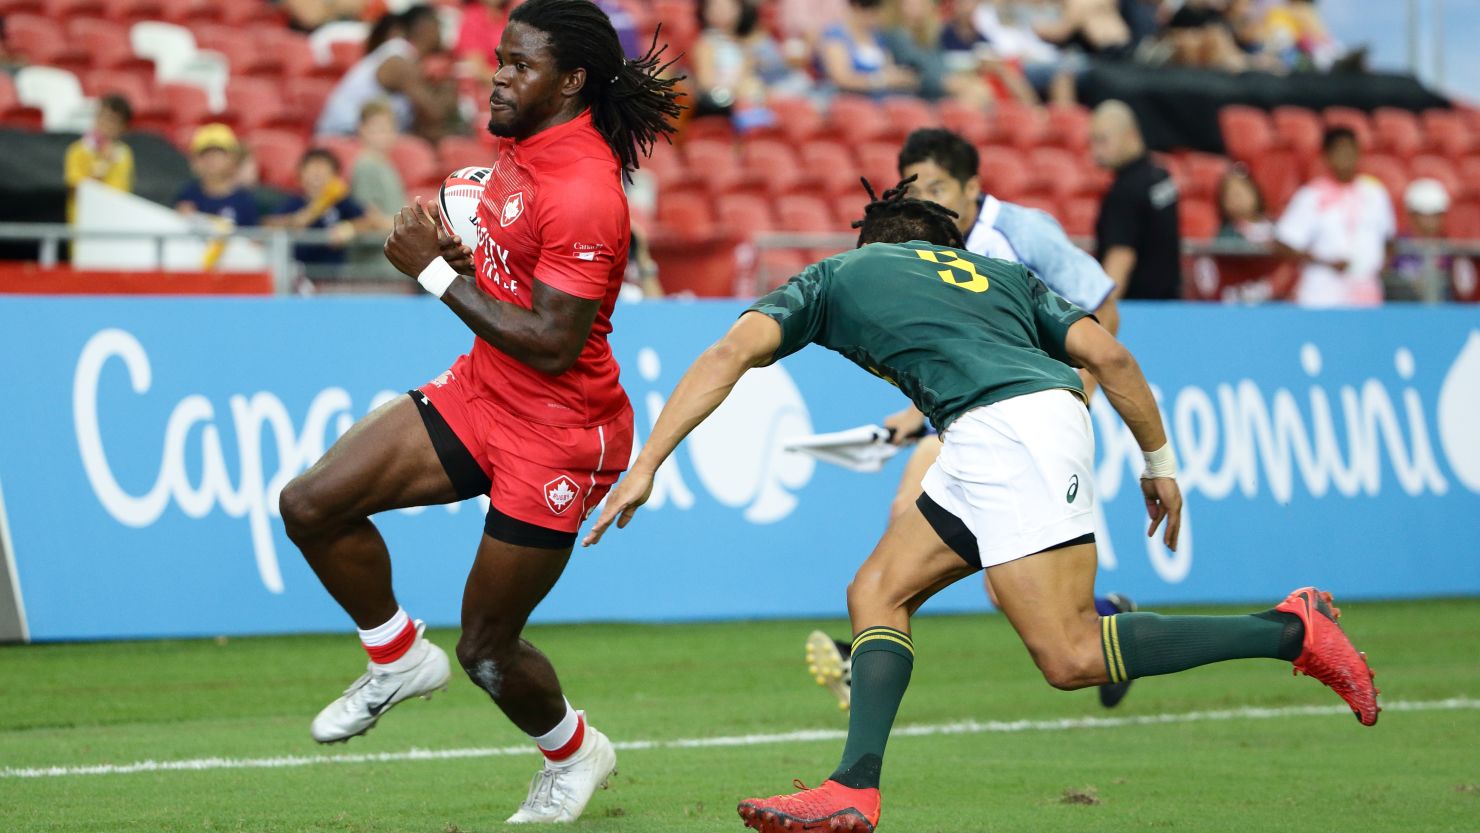 Tevaughn Campbell took the stride from American football in the CFL to rugby sevens.
Ind